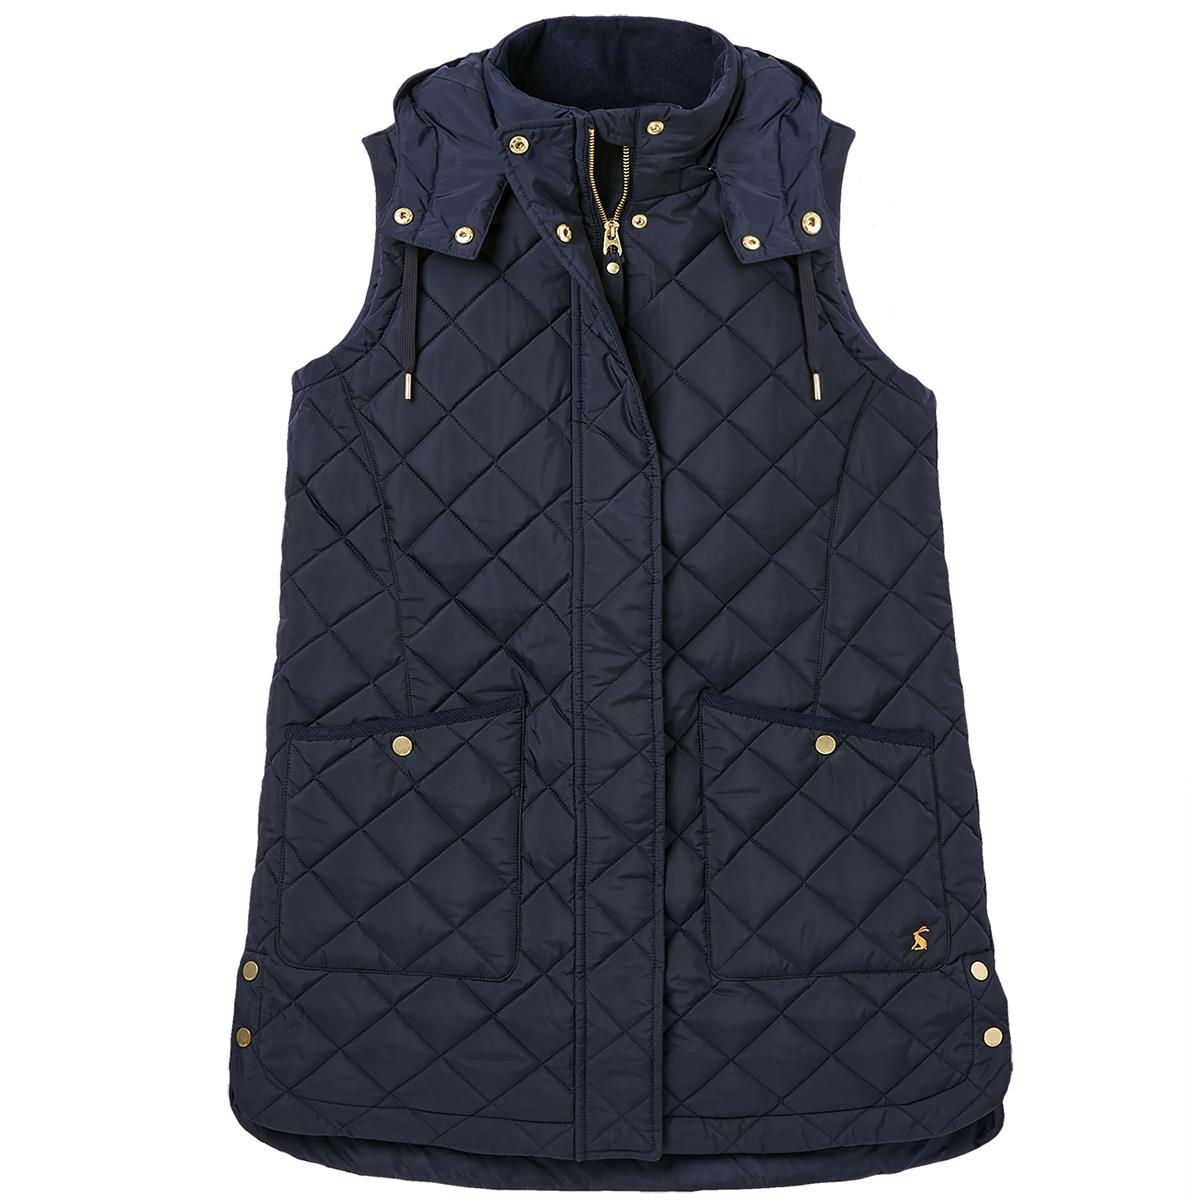 What exactly is the Joules Chatham Gilet for women?